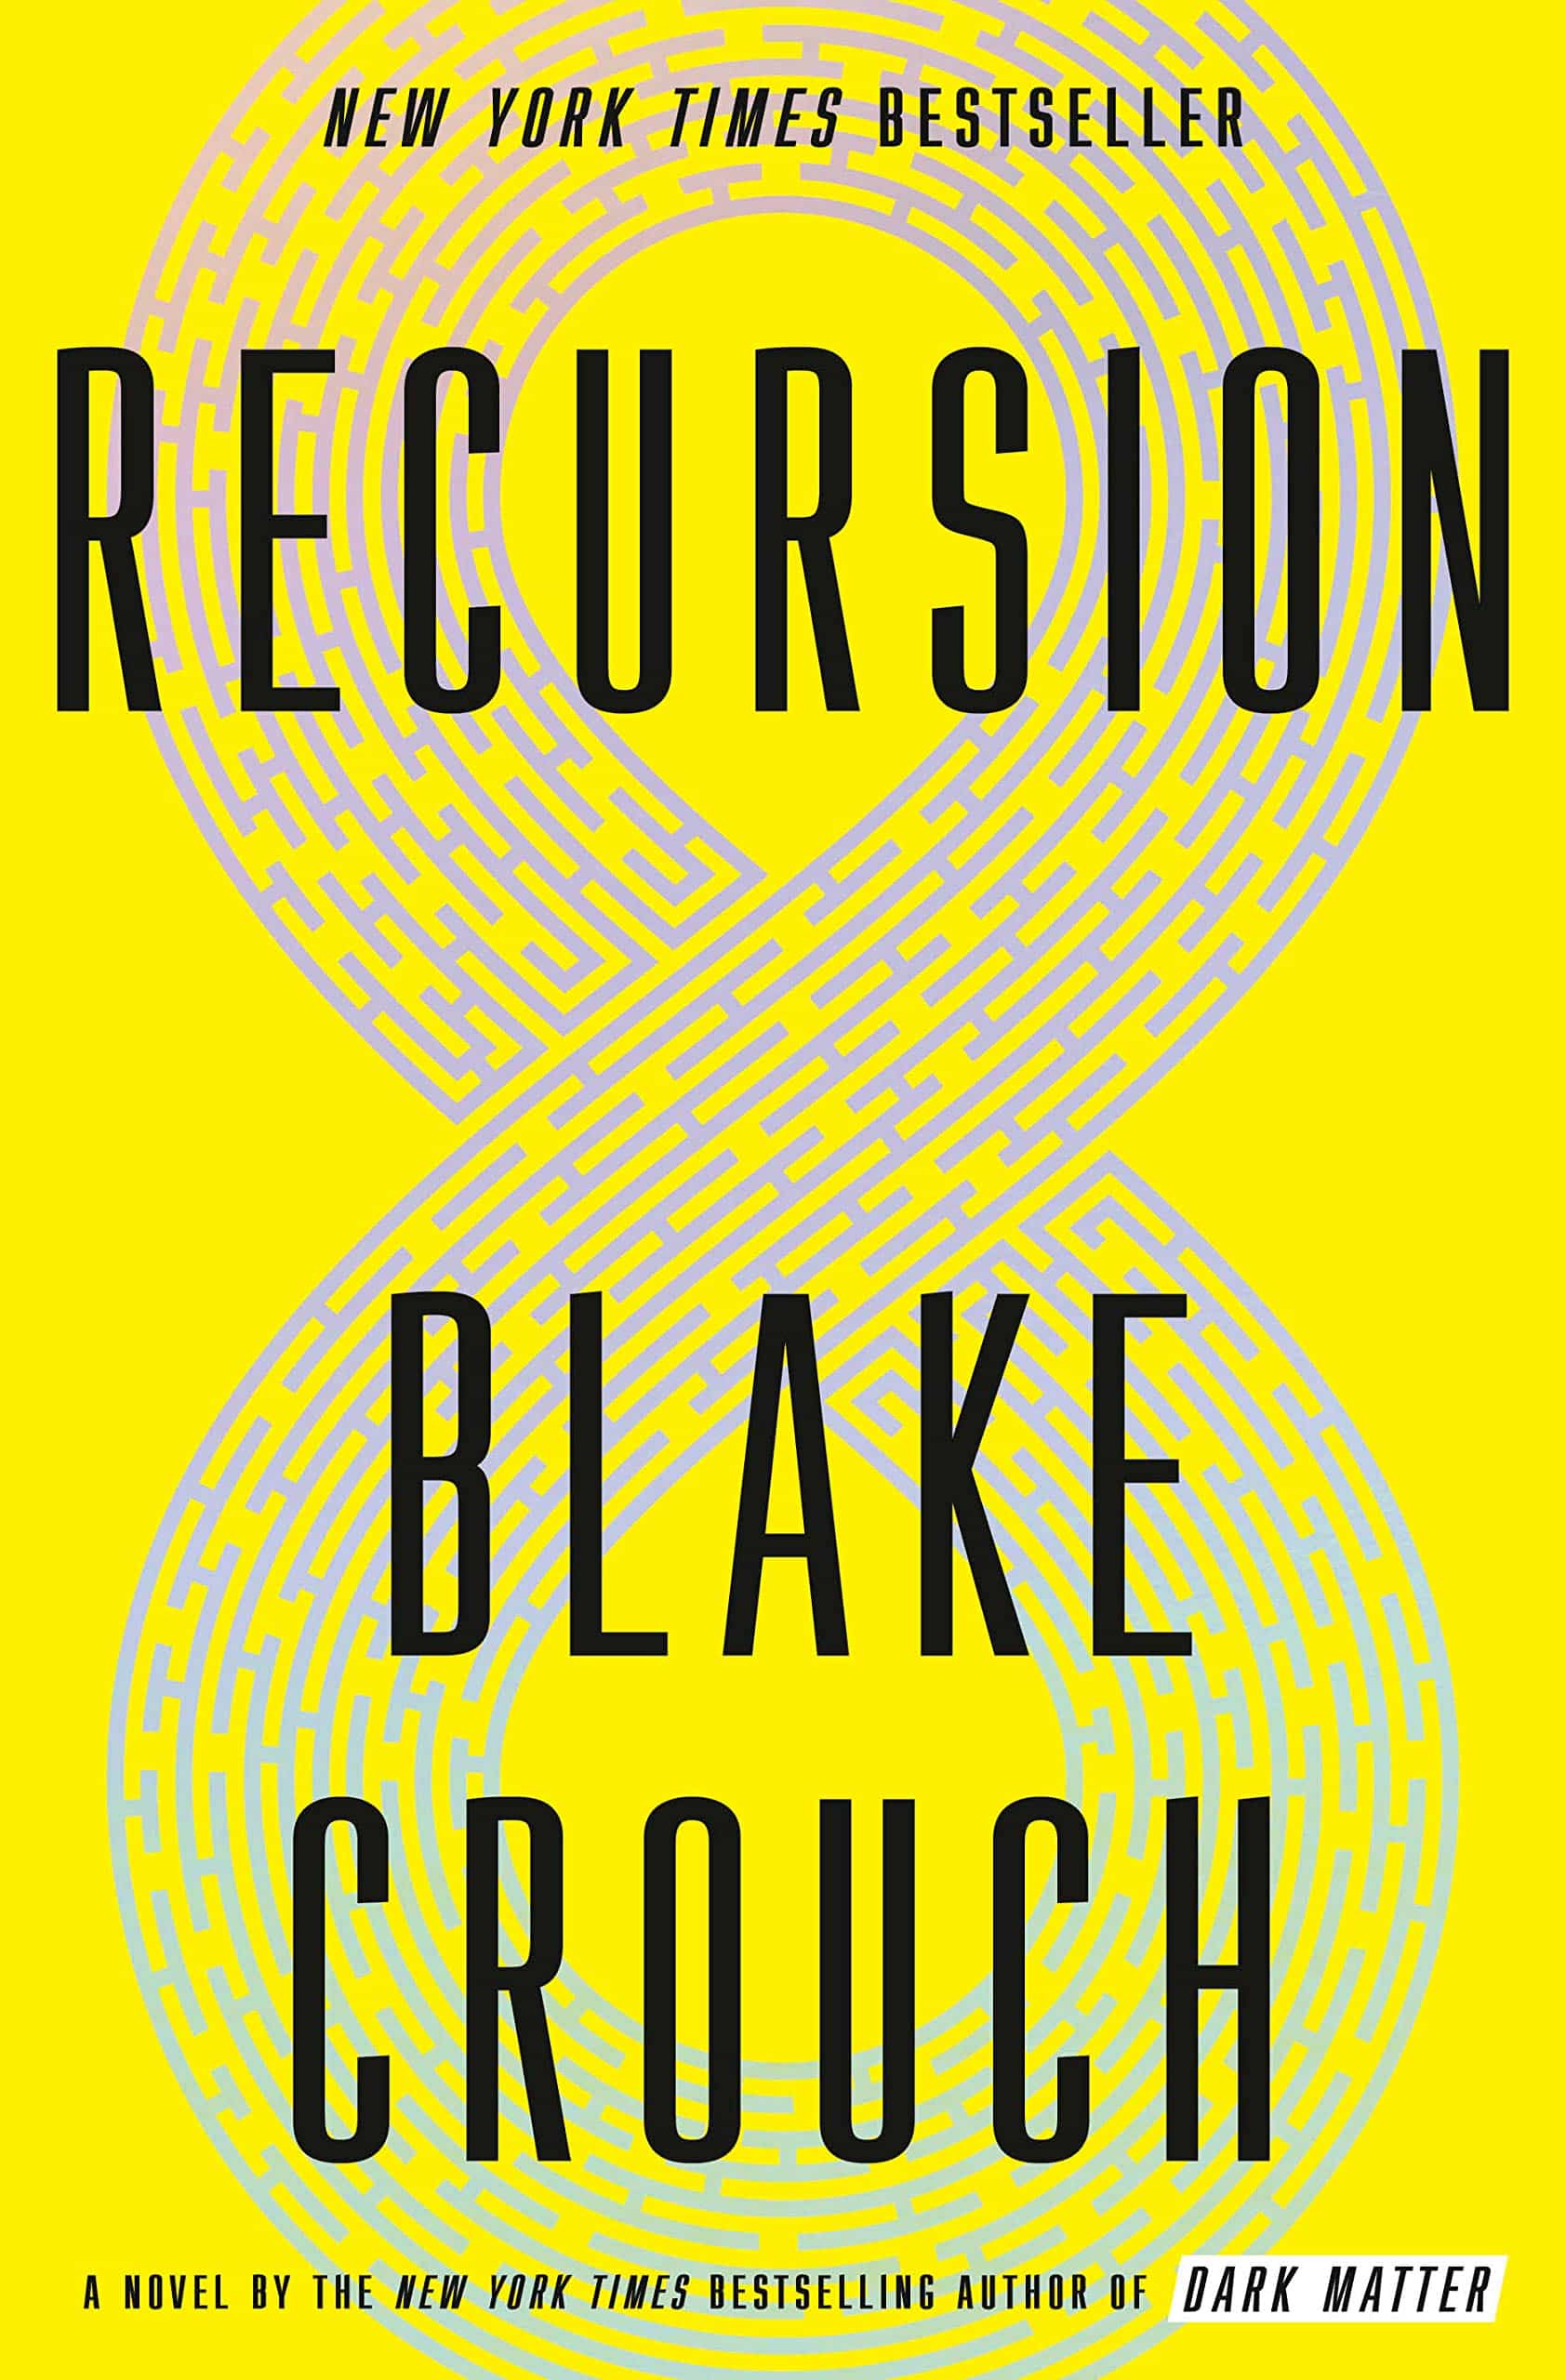 The cover of Recursion